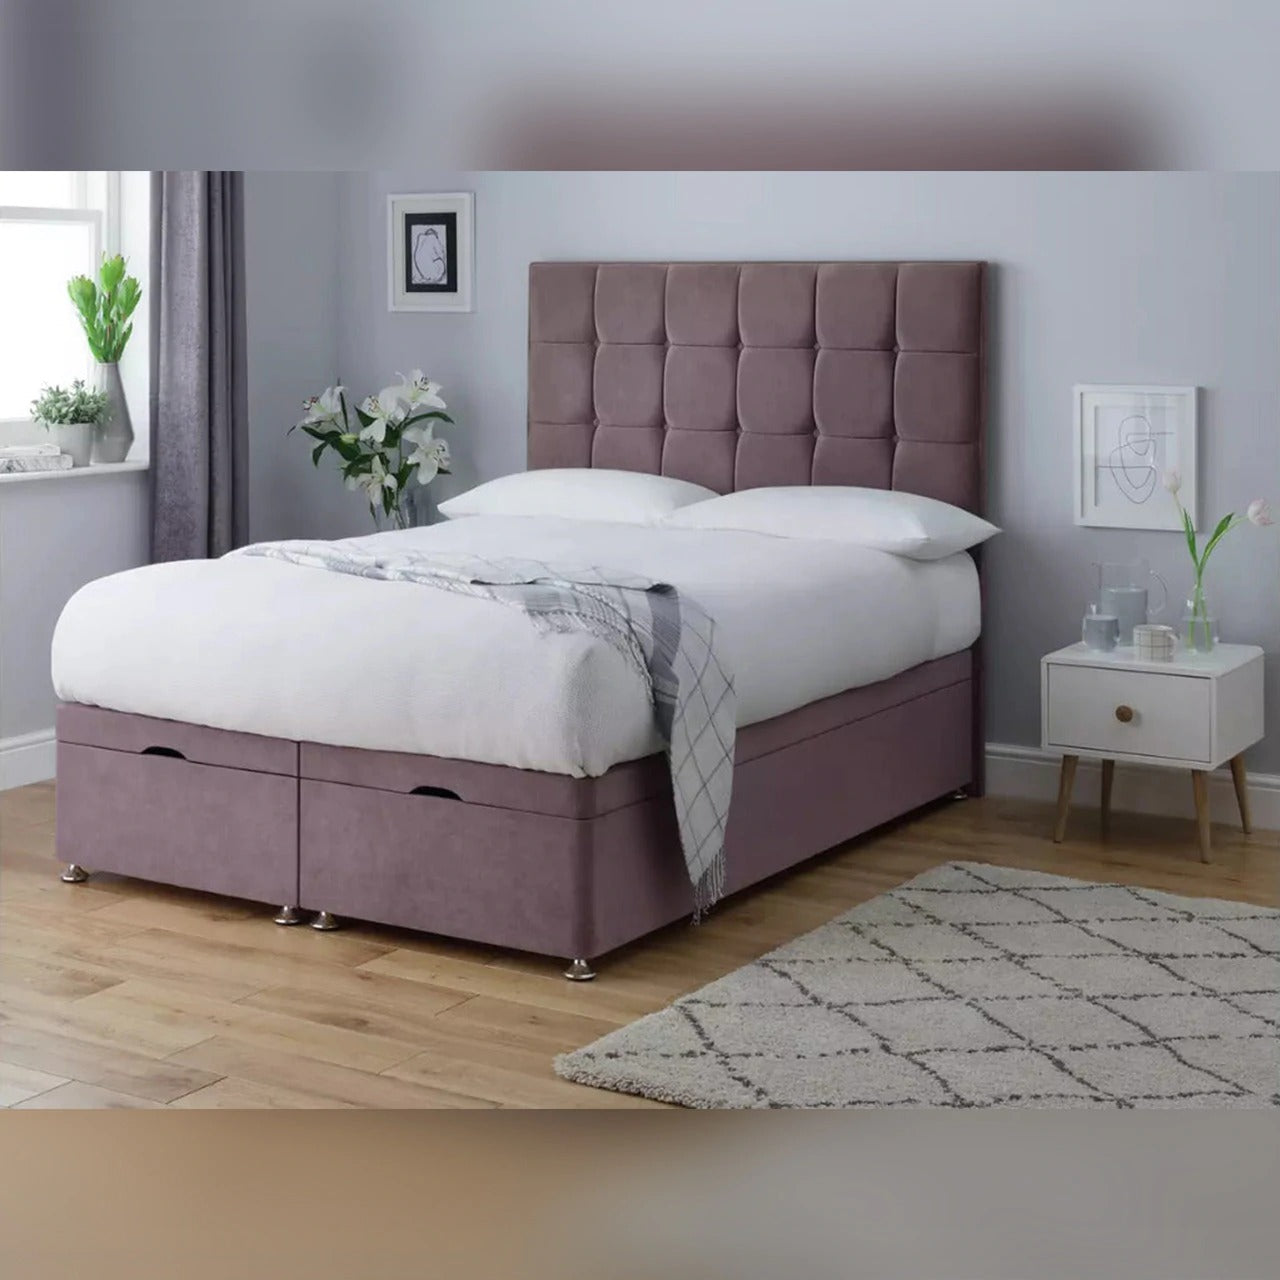 Double Bed, Designer Double Bed, Double Bed Price, Double Bed Size